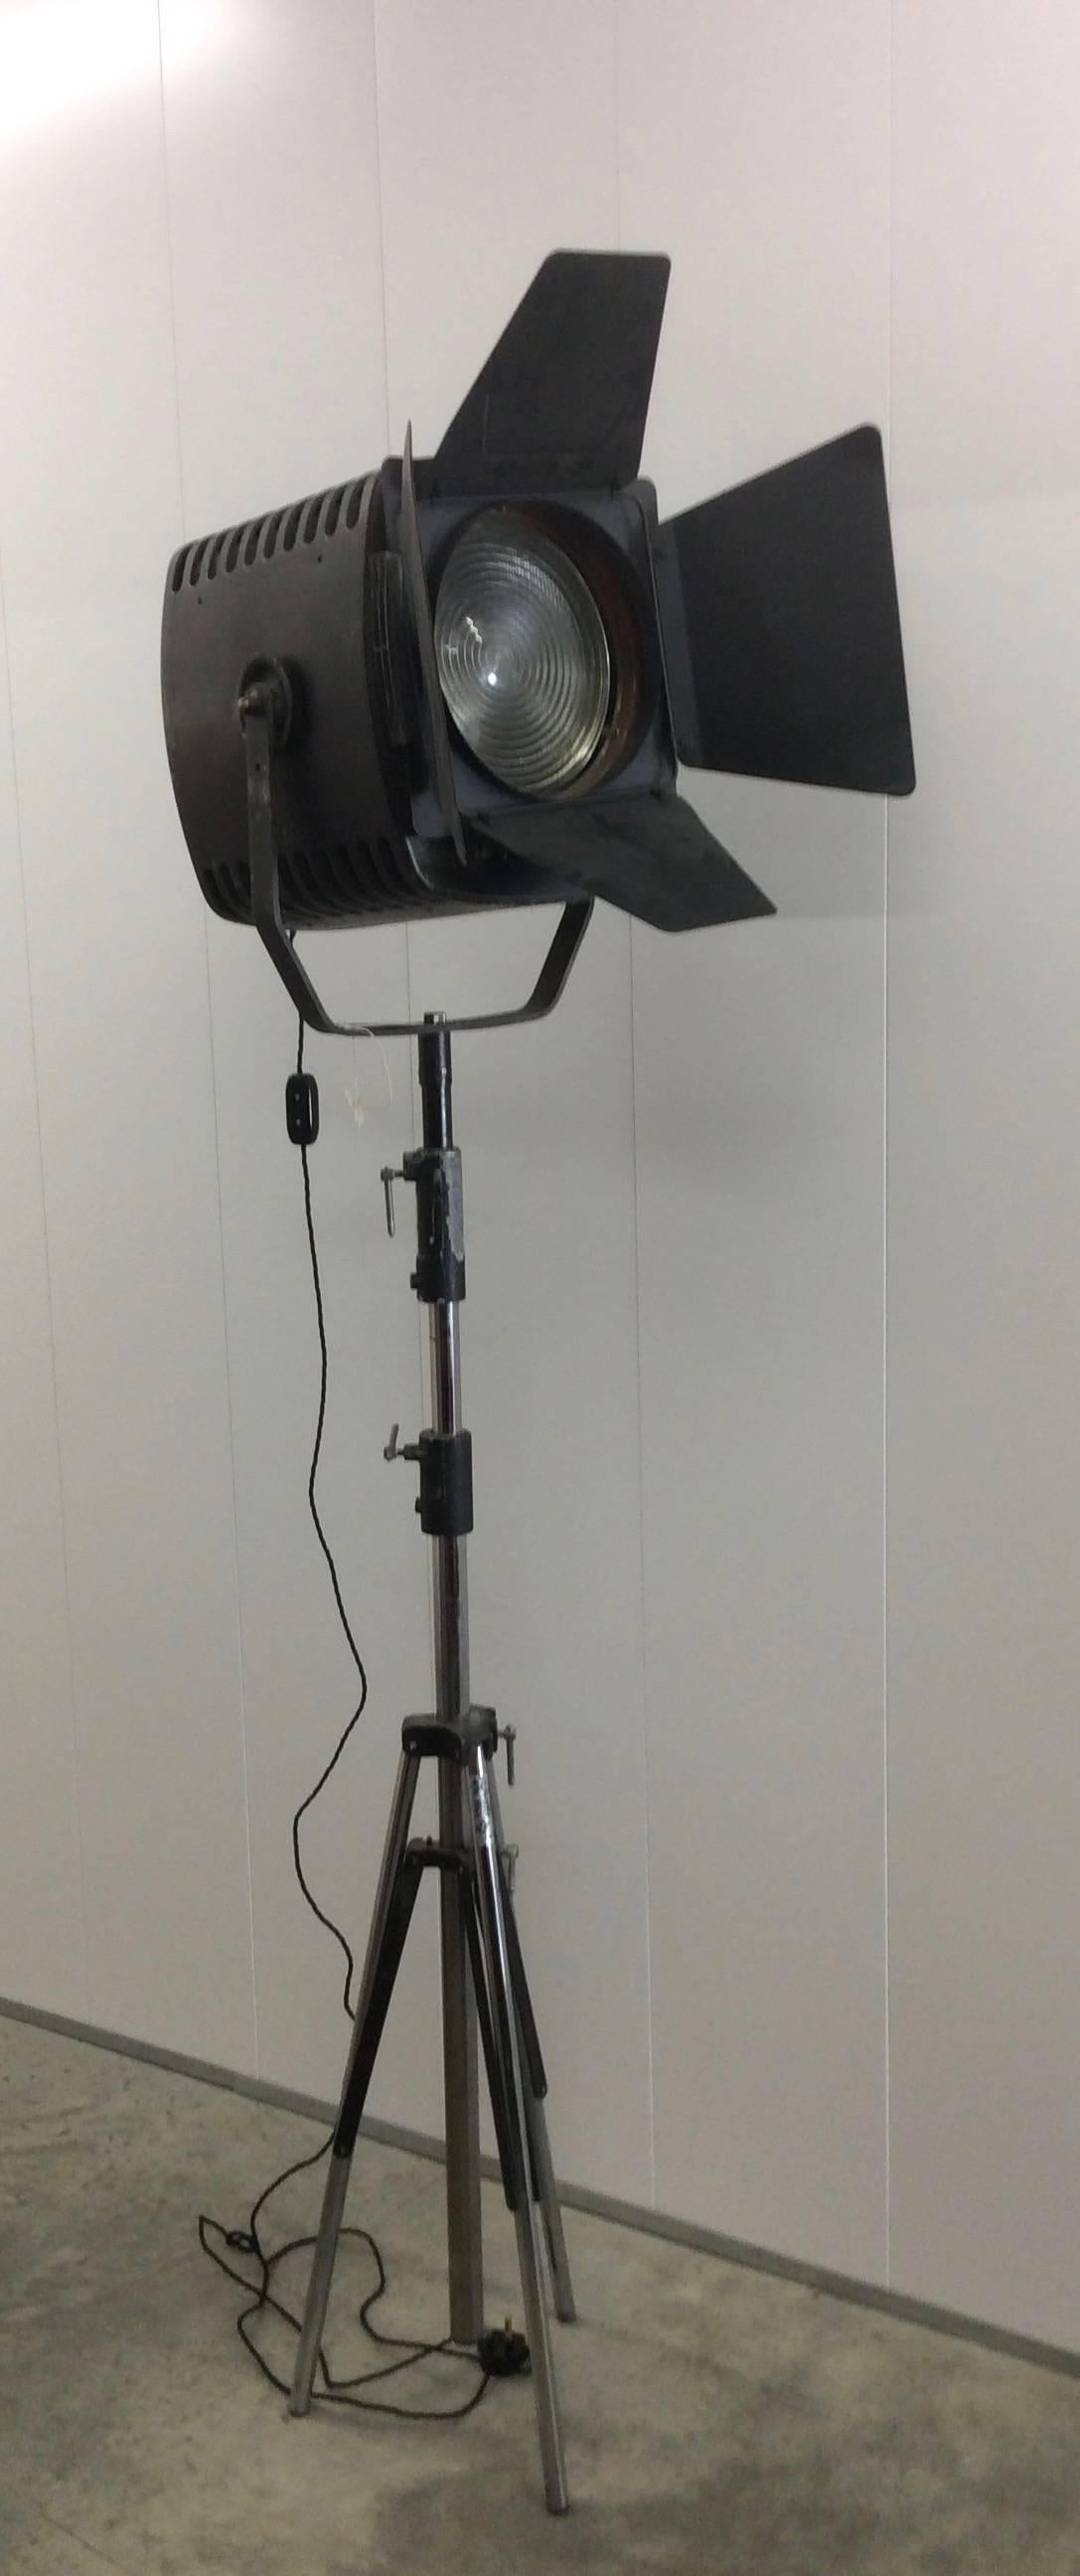 Vintage theatre light by Strand Electric, on telescopic tripod stand, black metal casing with adjustable slot in barn doors.
All re wired for domestic use with inline switch.
This vintage light has come from Rank Film Equipment
Measures: